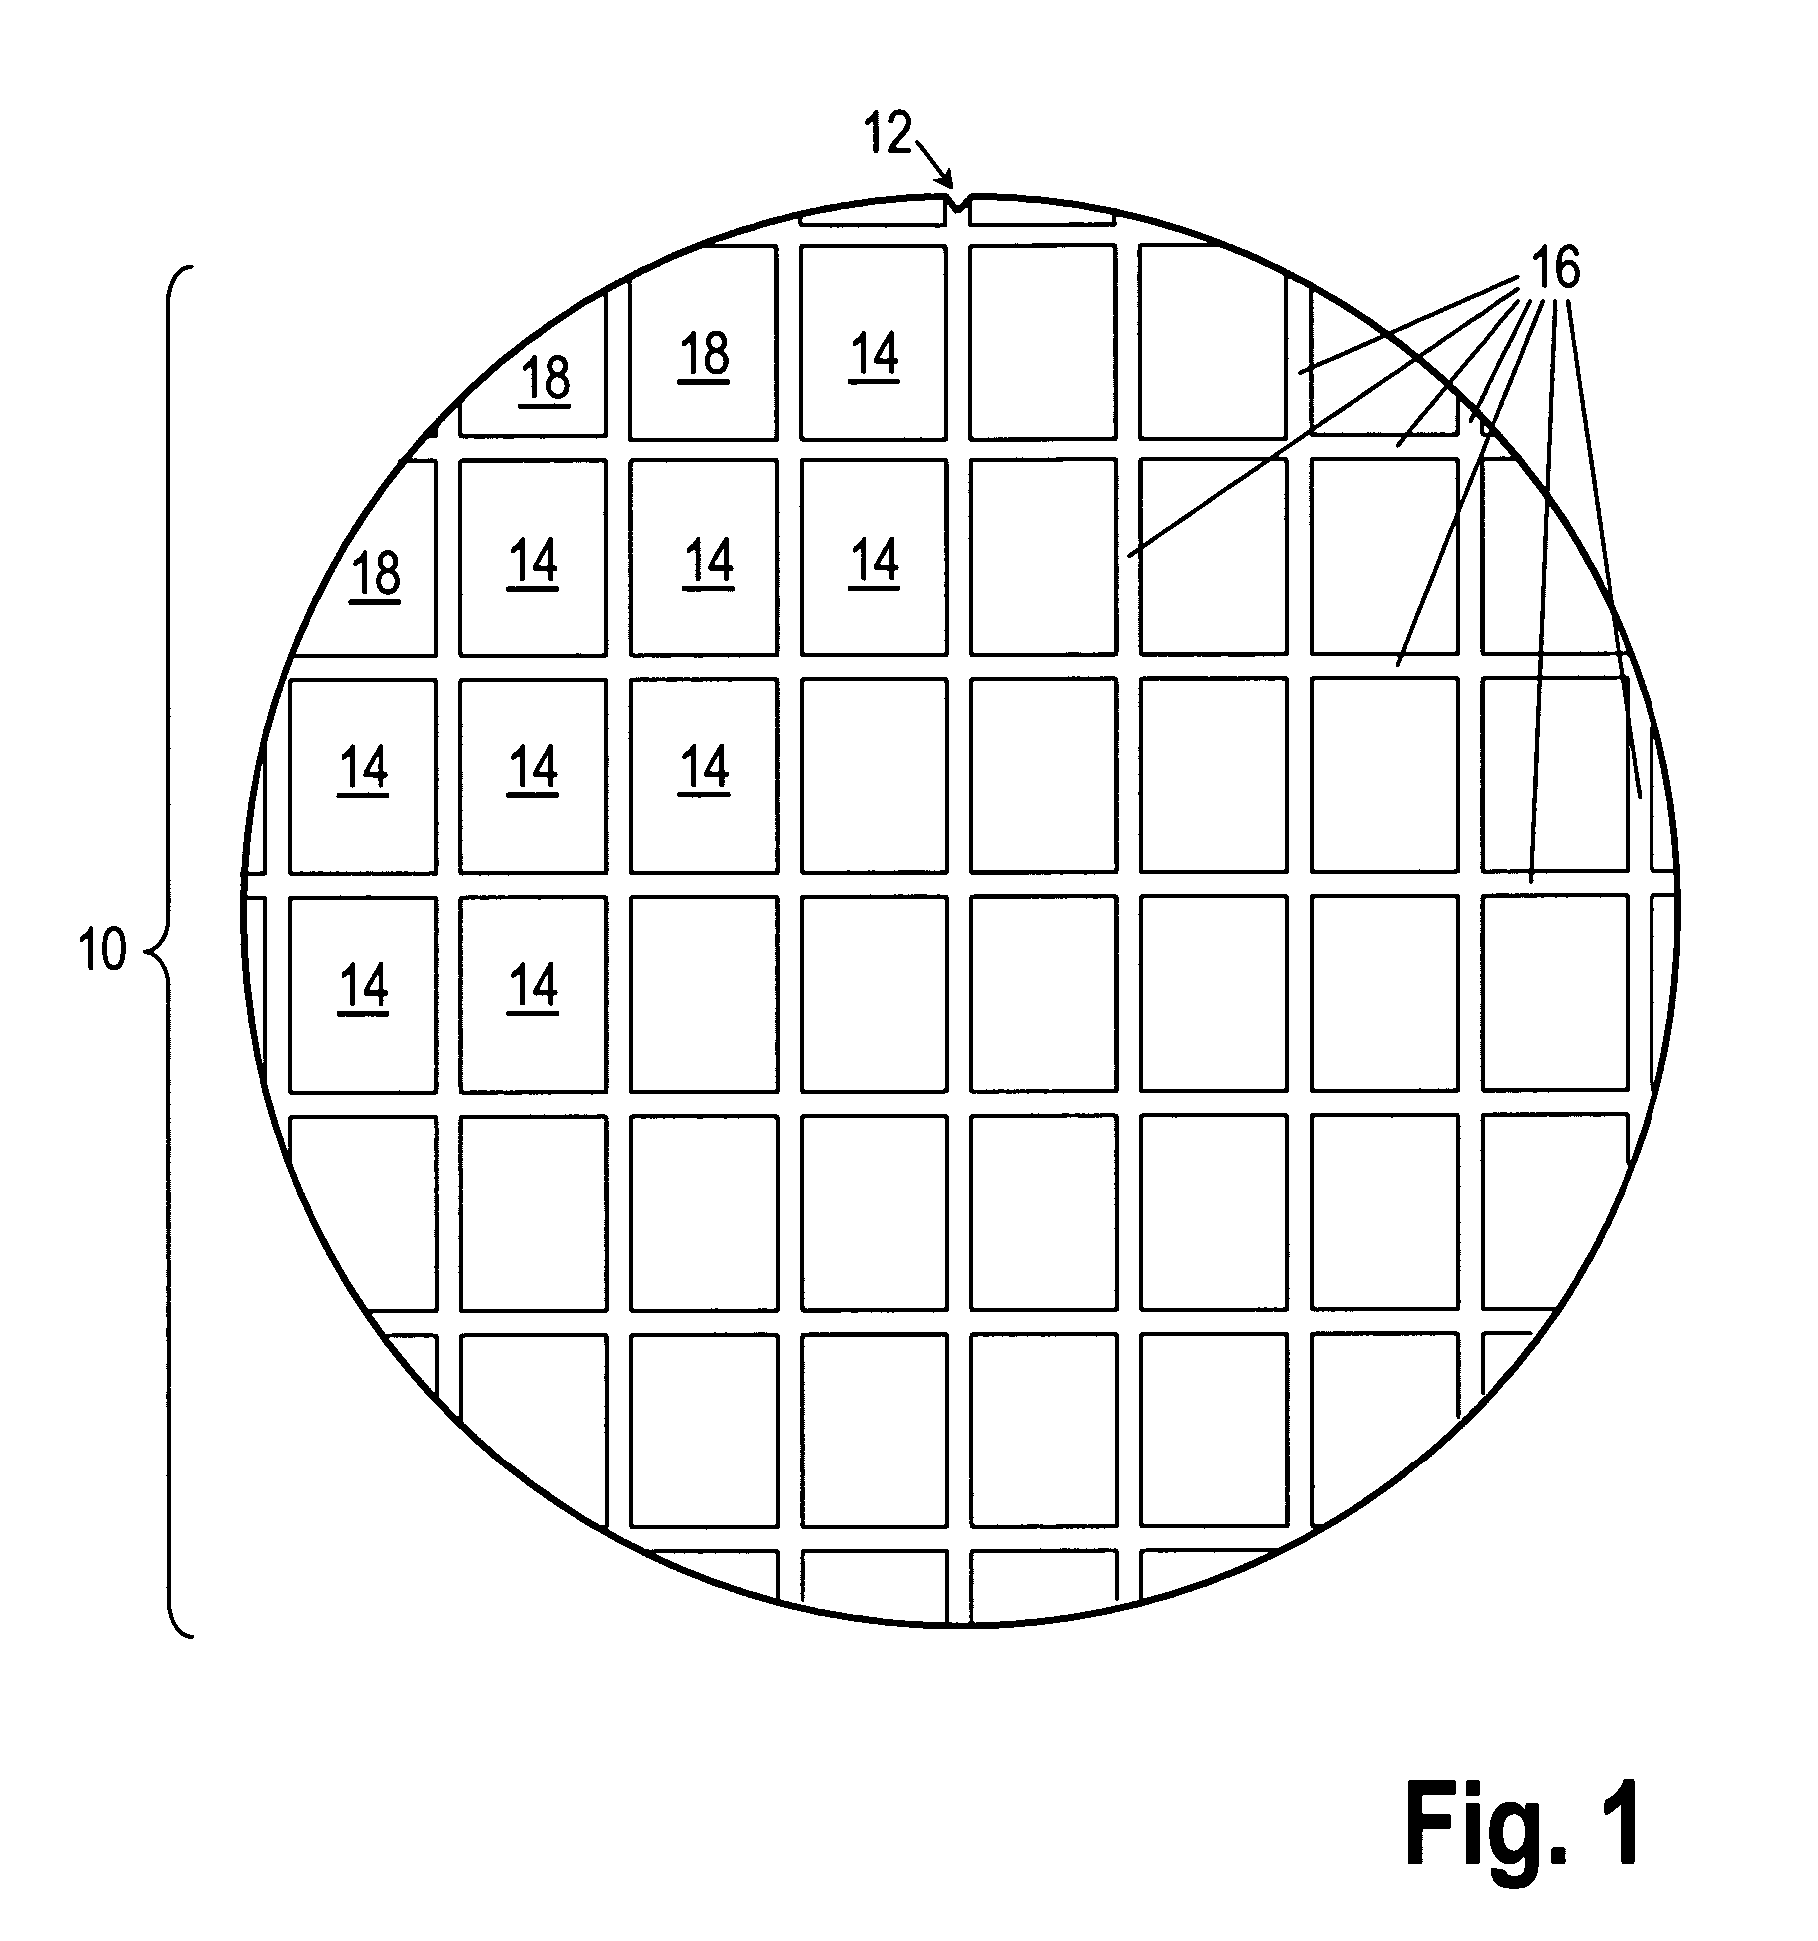 Method for reducing stress concentrations on a semiconductor wafer by surface laser treatment